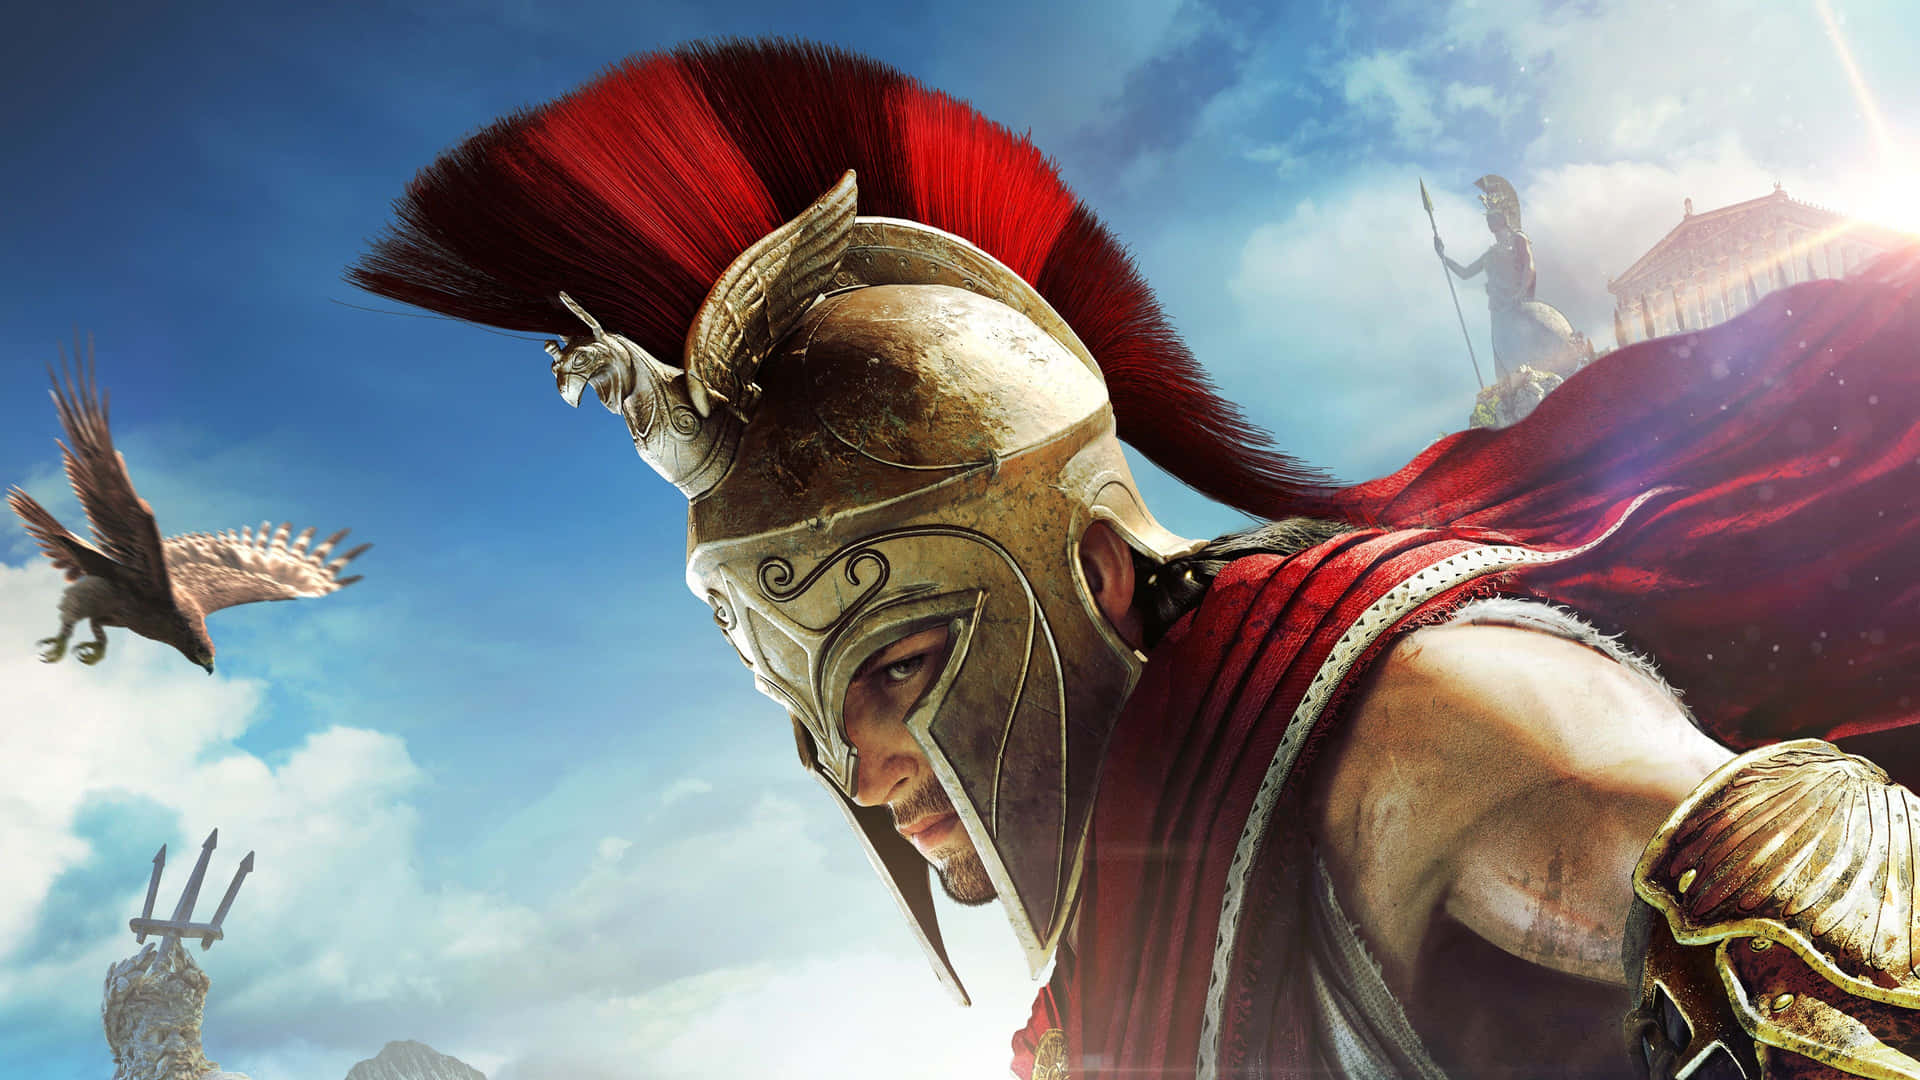 The world of Assassin's Creed Odyssey awaits